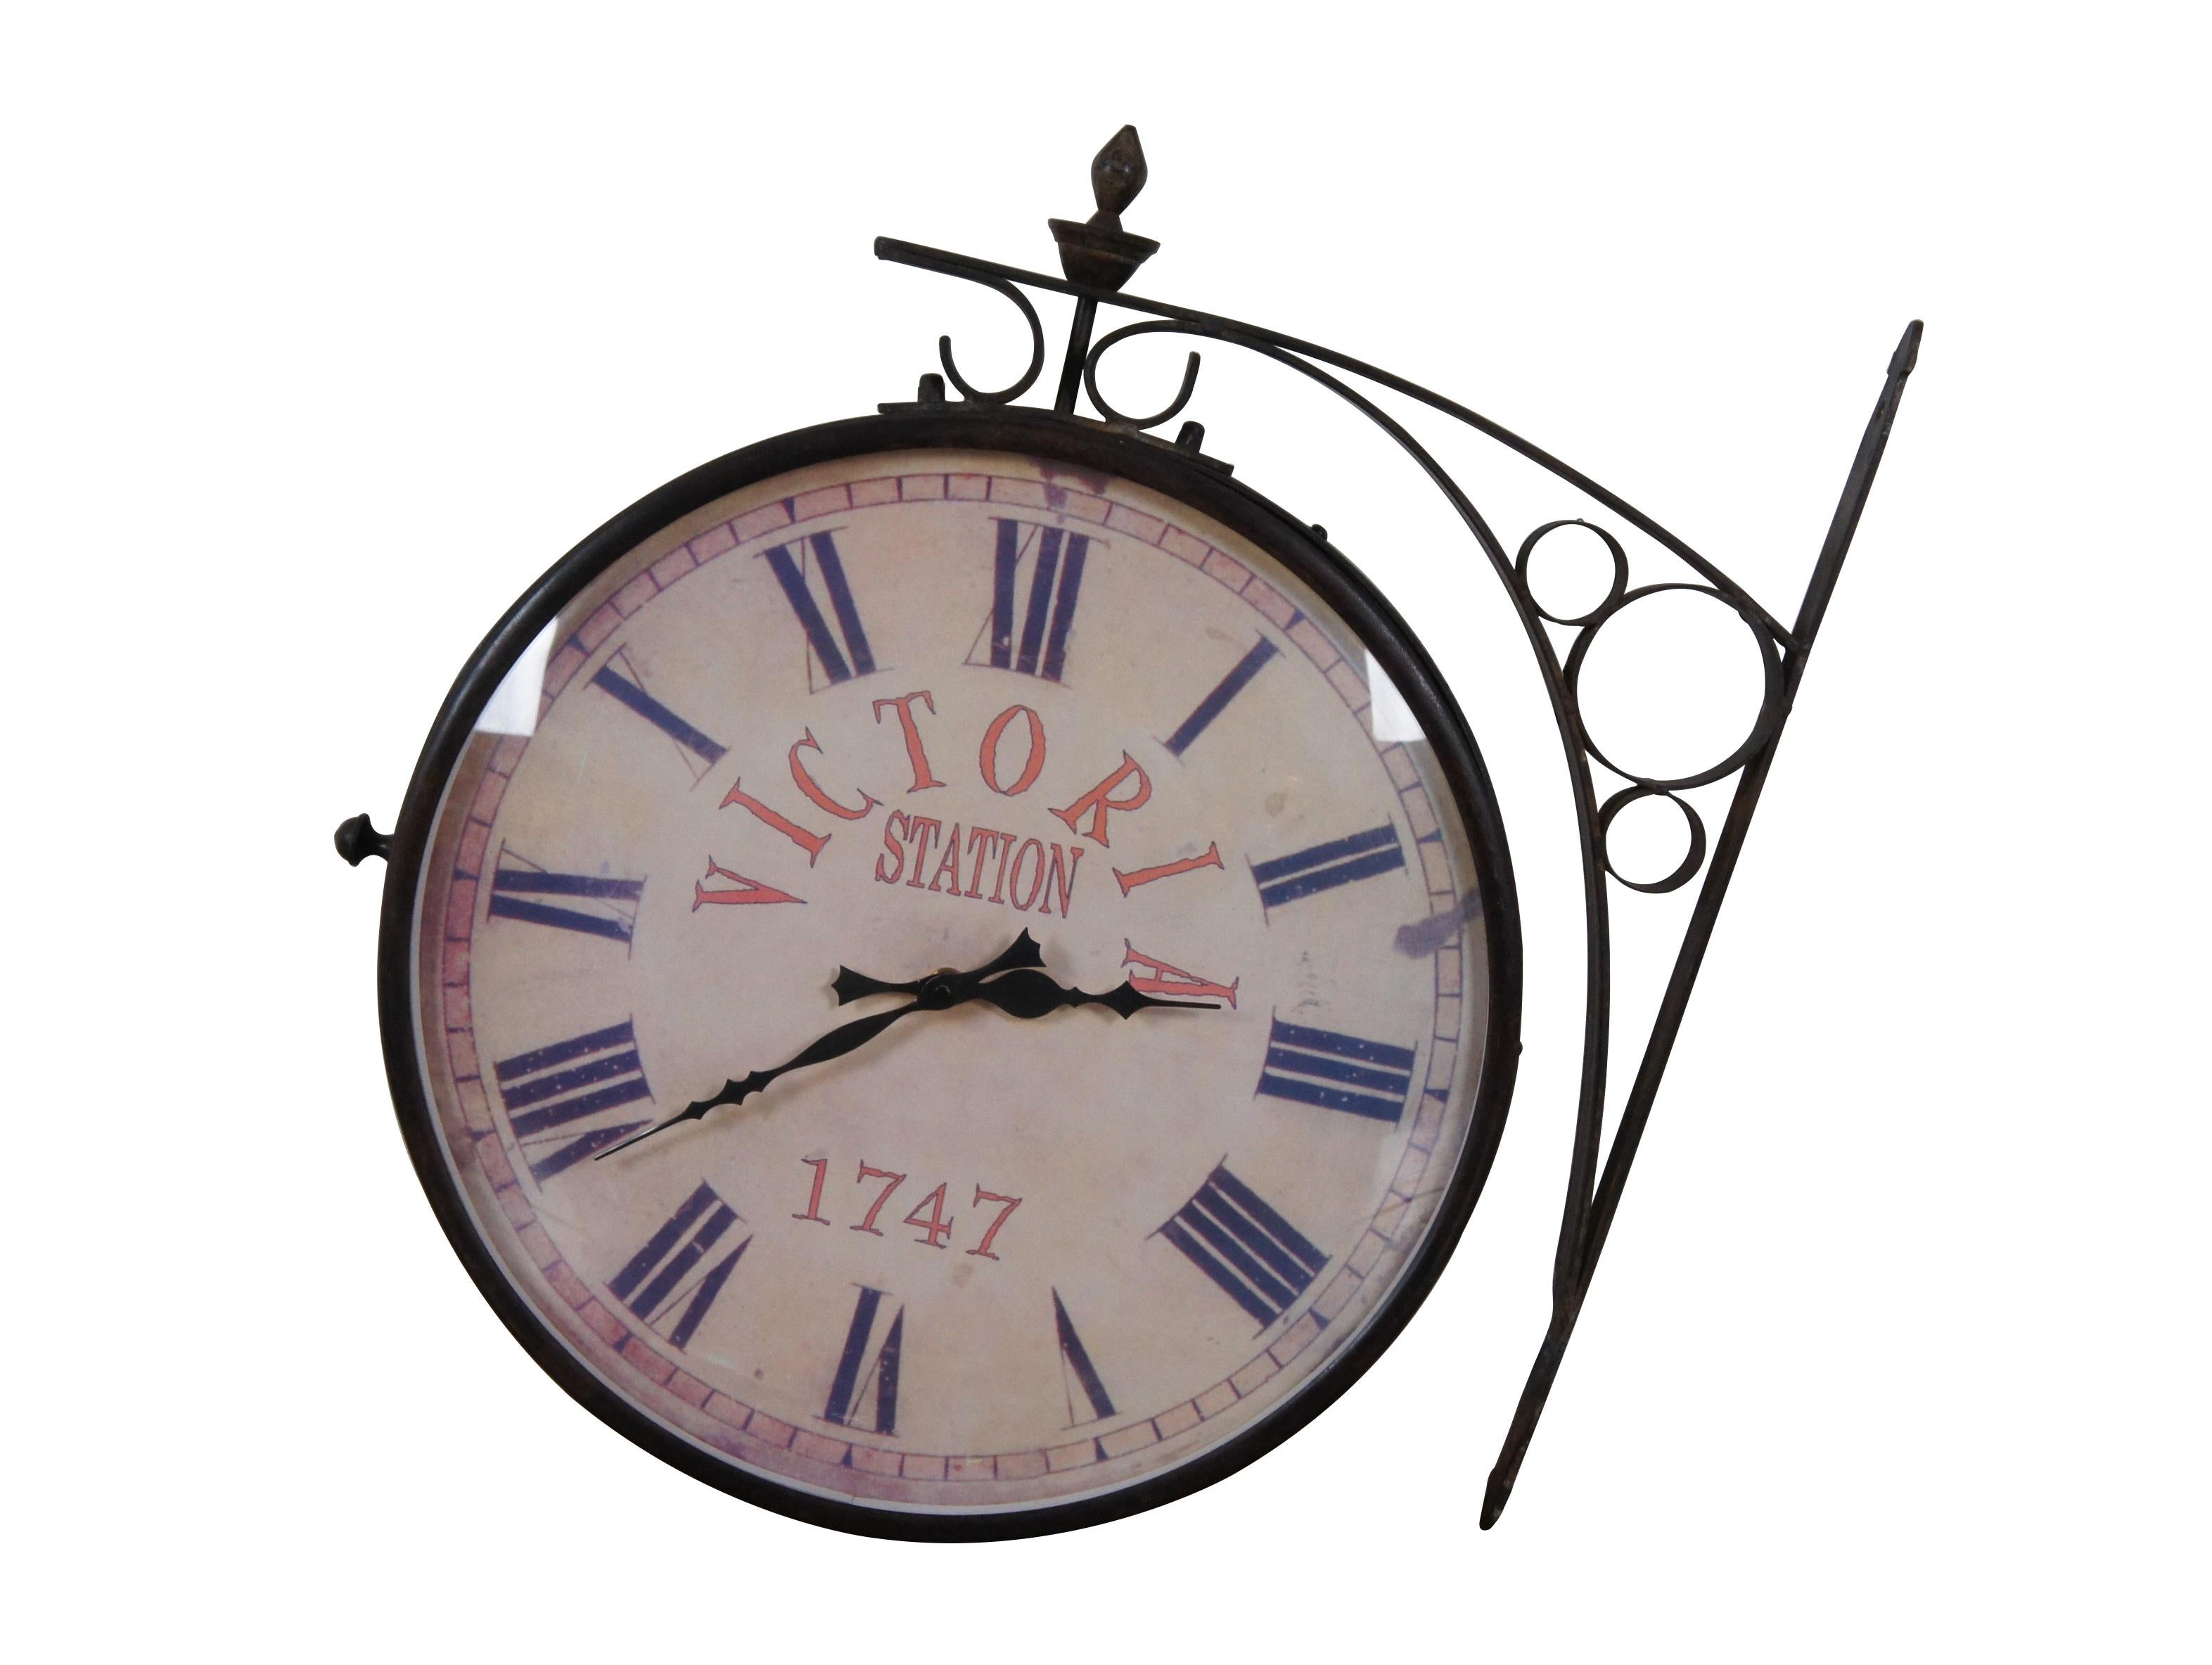 2 Available - Late 20th century double sided railway clock styled after the famous clock at Victoria Station, London. Wrought metal wall mounted support and case in a dark bronze finish. 14 inch diameter printed face with faux distressing, Roman